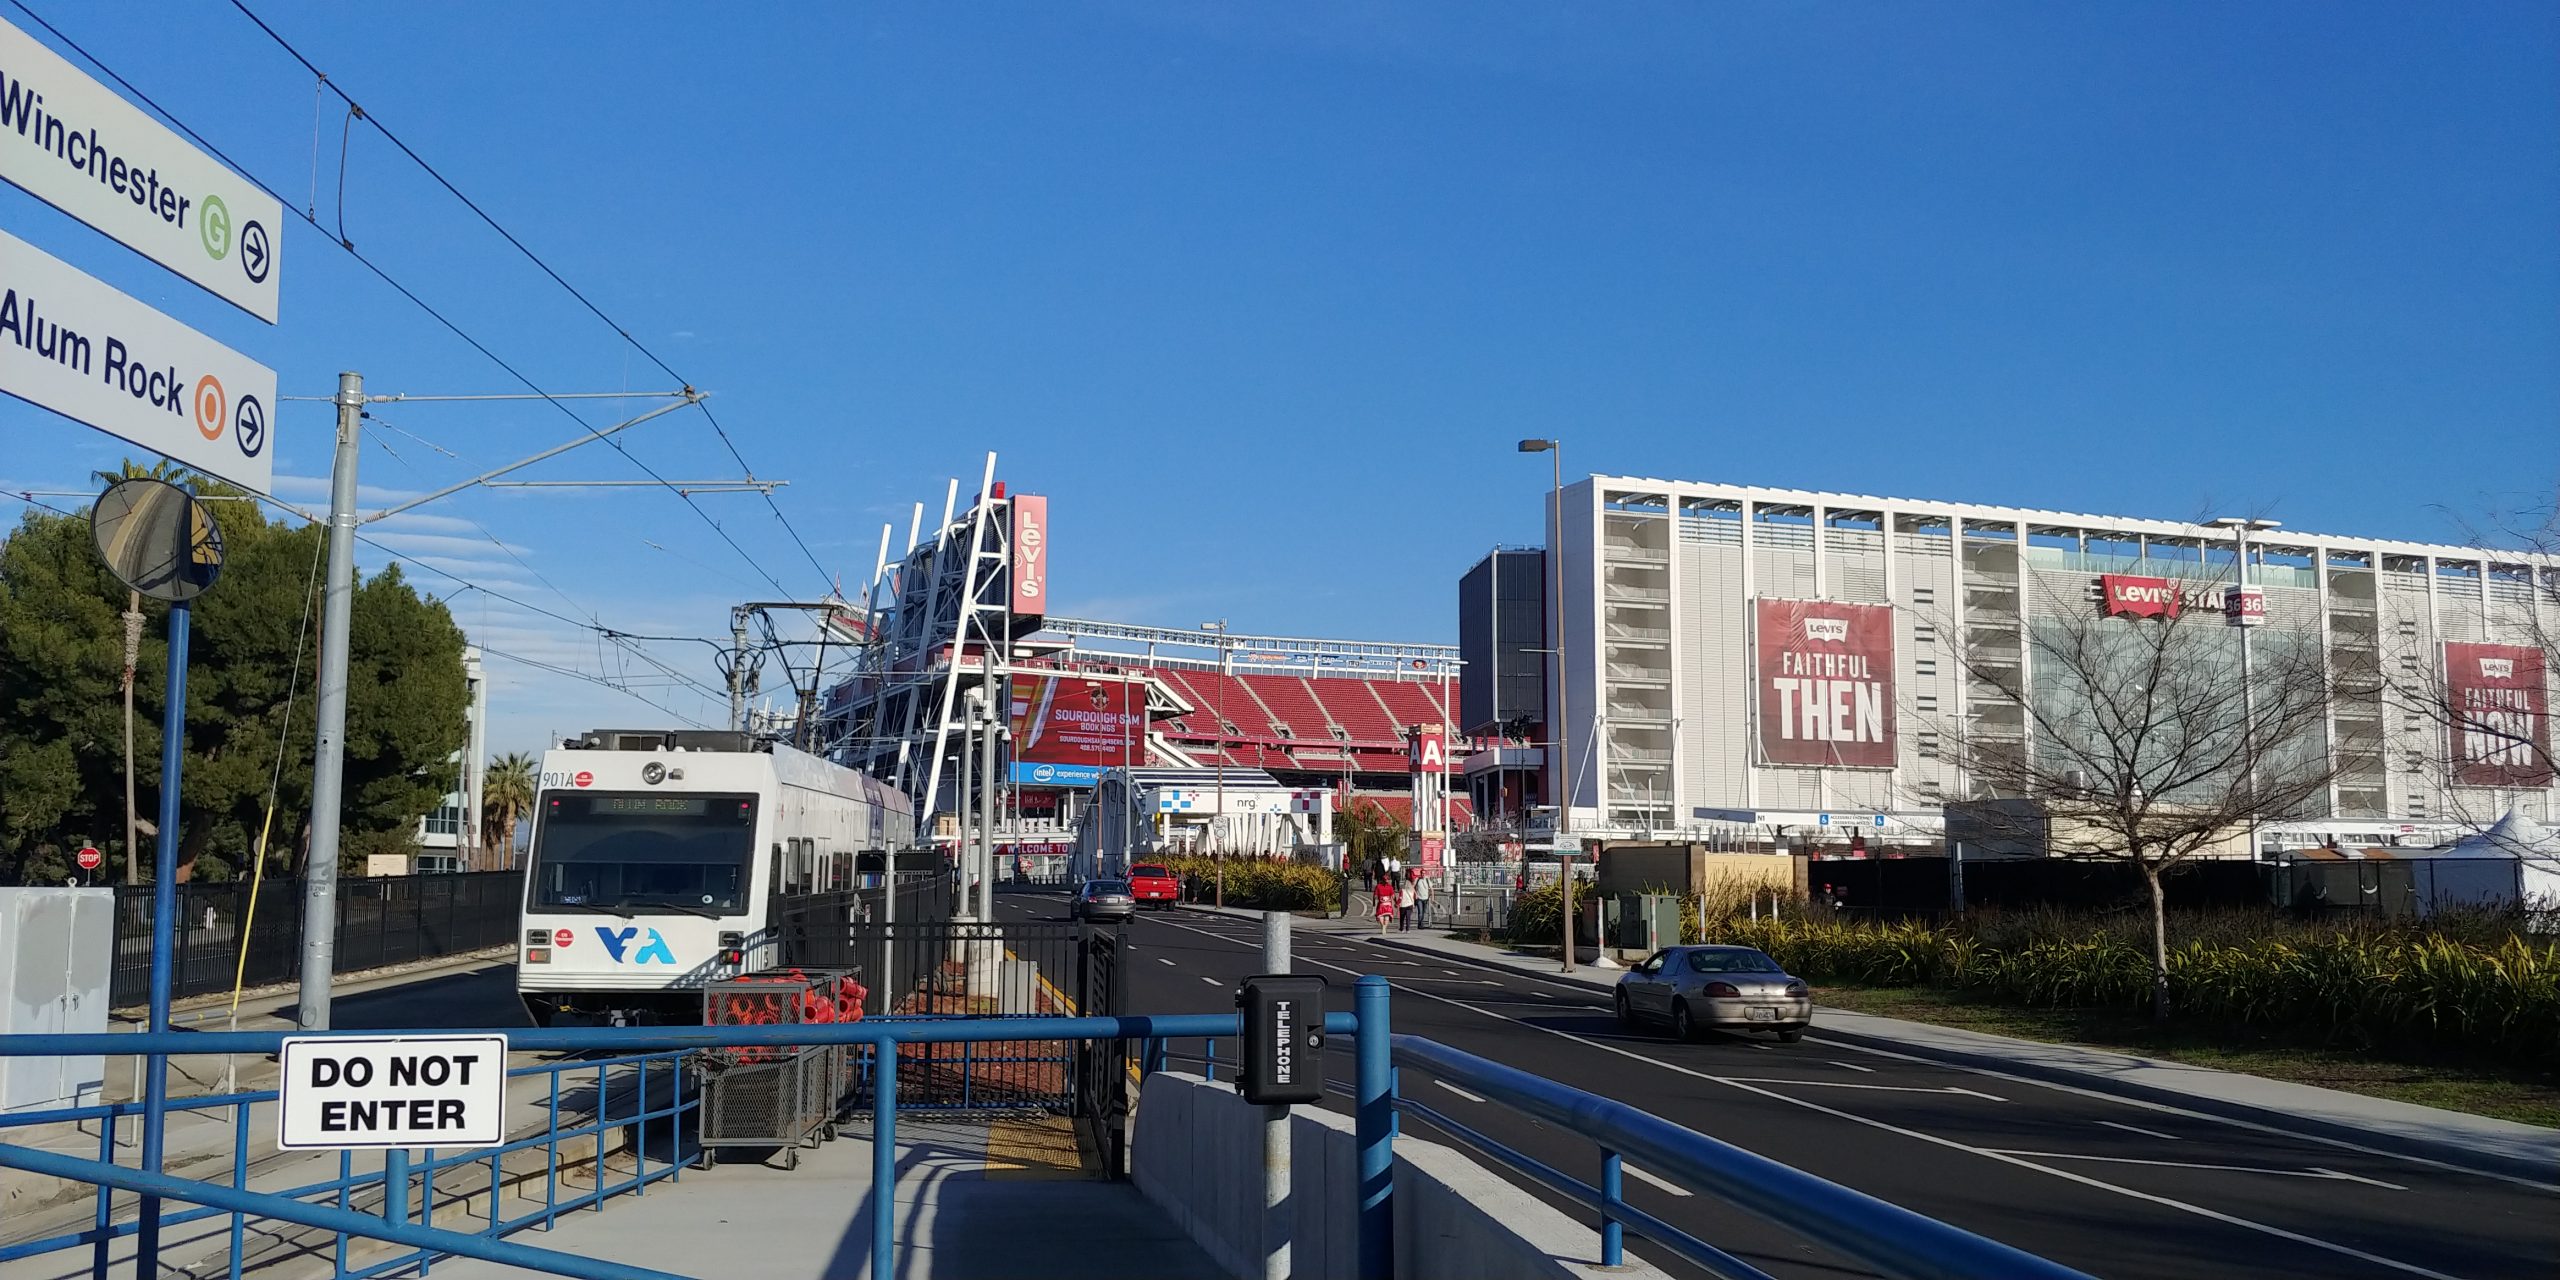 Transit Options For the Niners' Really Big Game – Silicon Valley Transit  Users